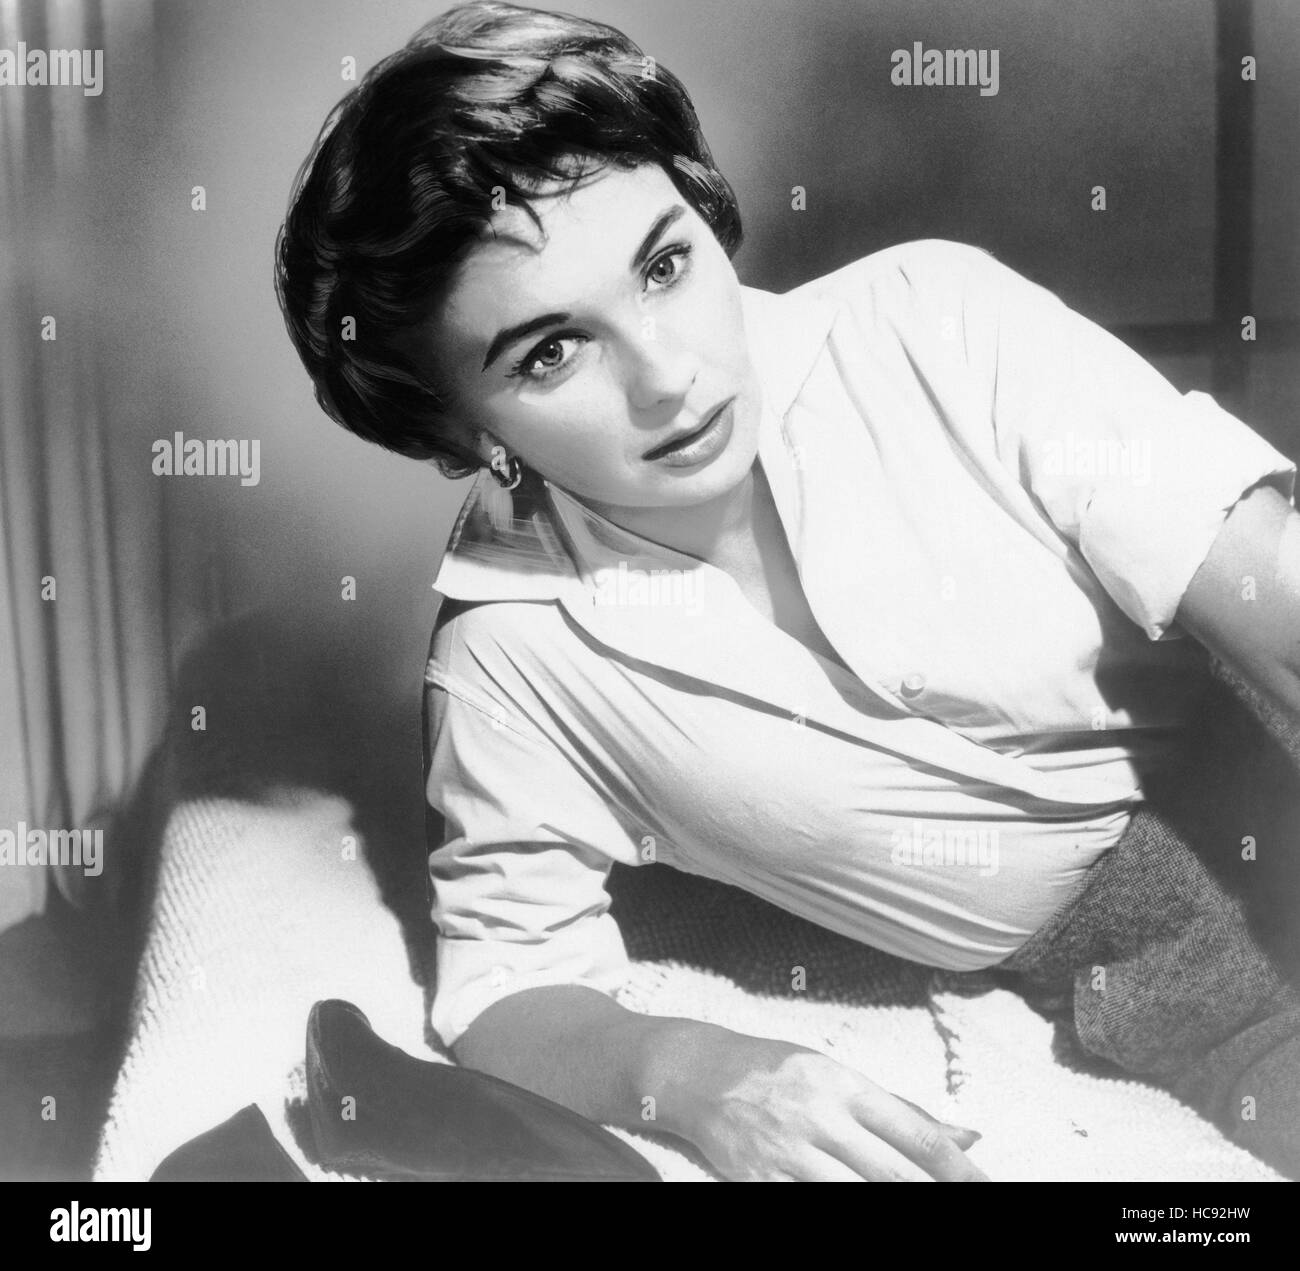 UNTIL THEY SAIL, Jean Simmons, 1957 Stock Photo - Alamy